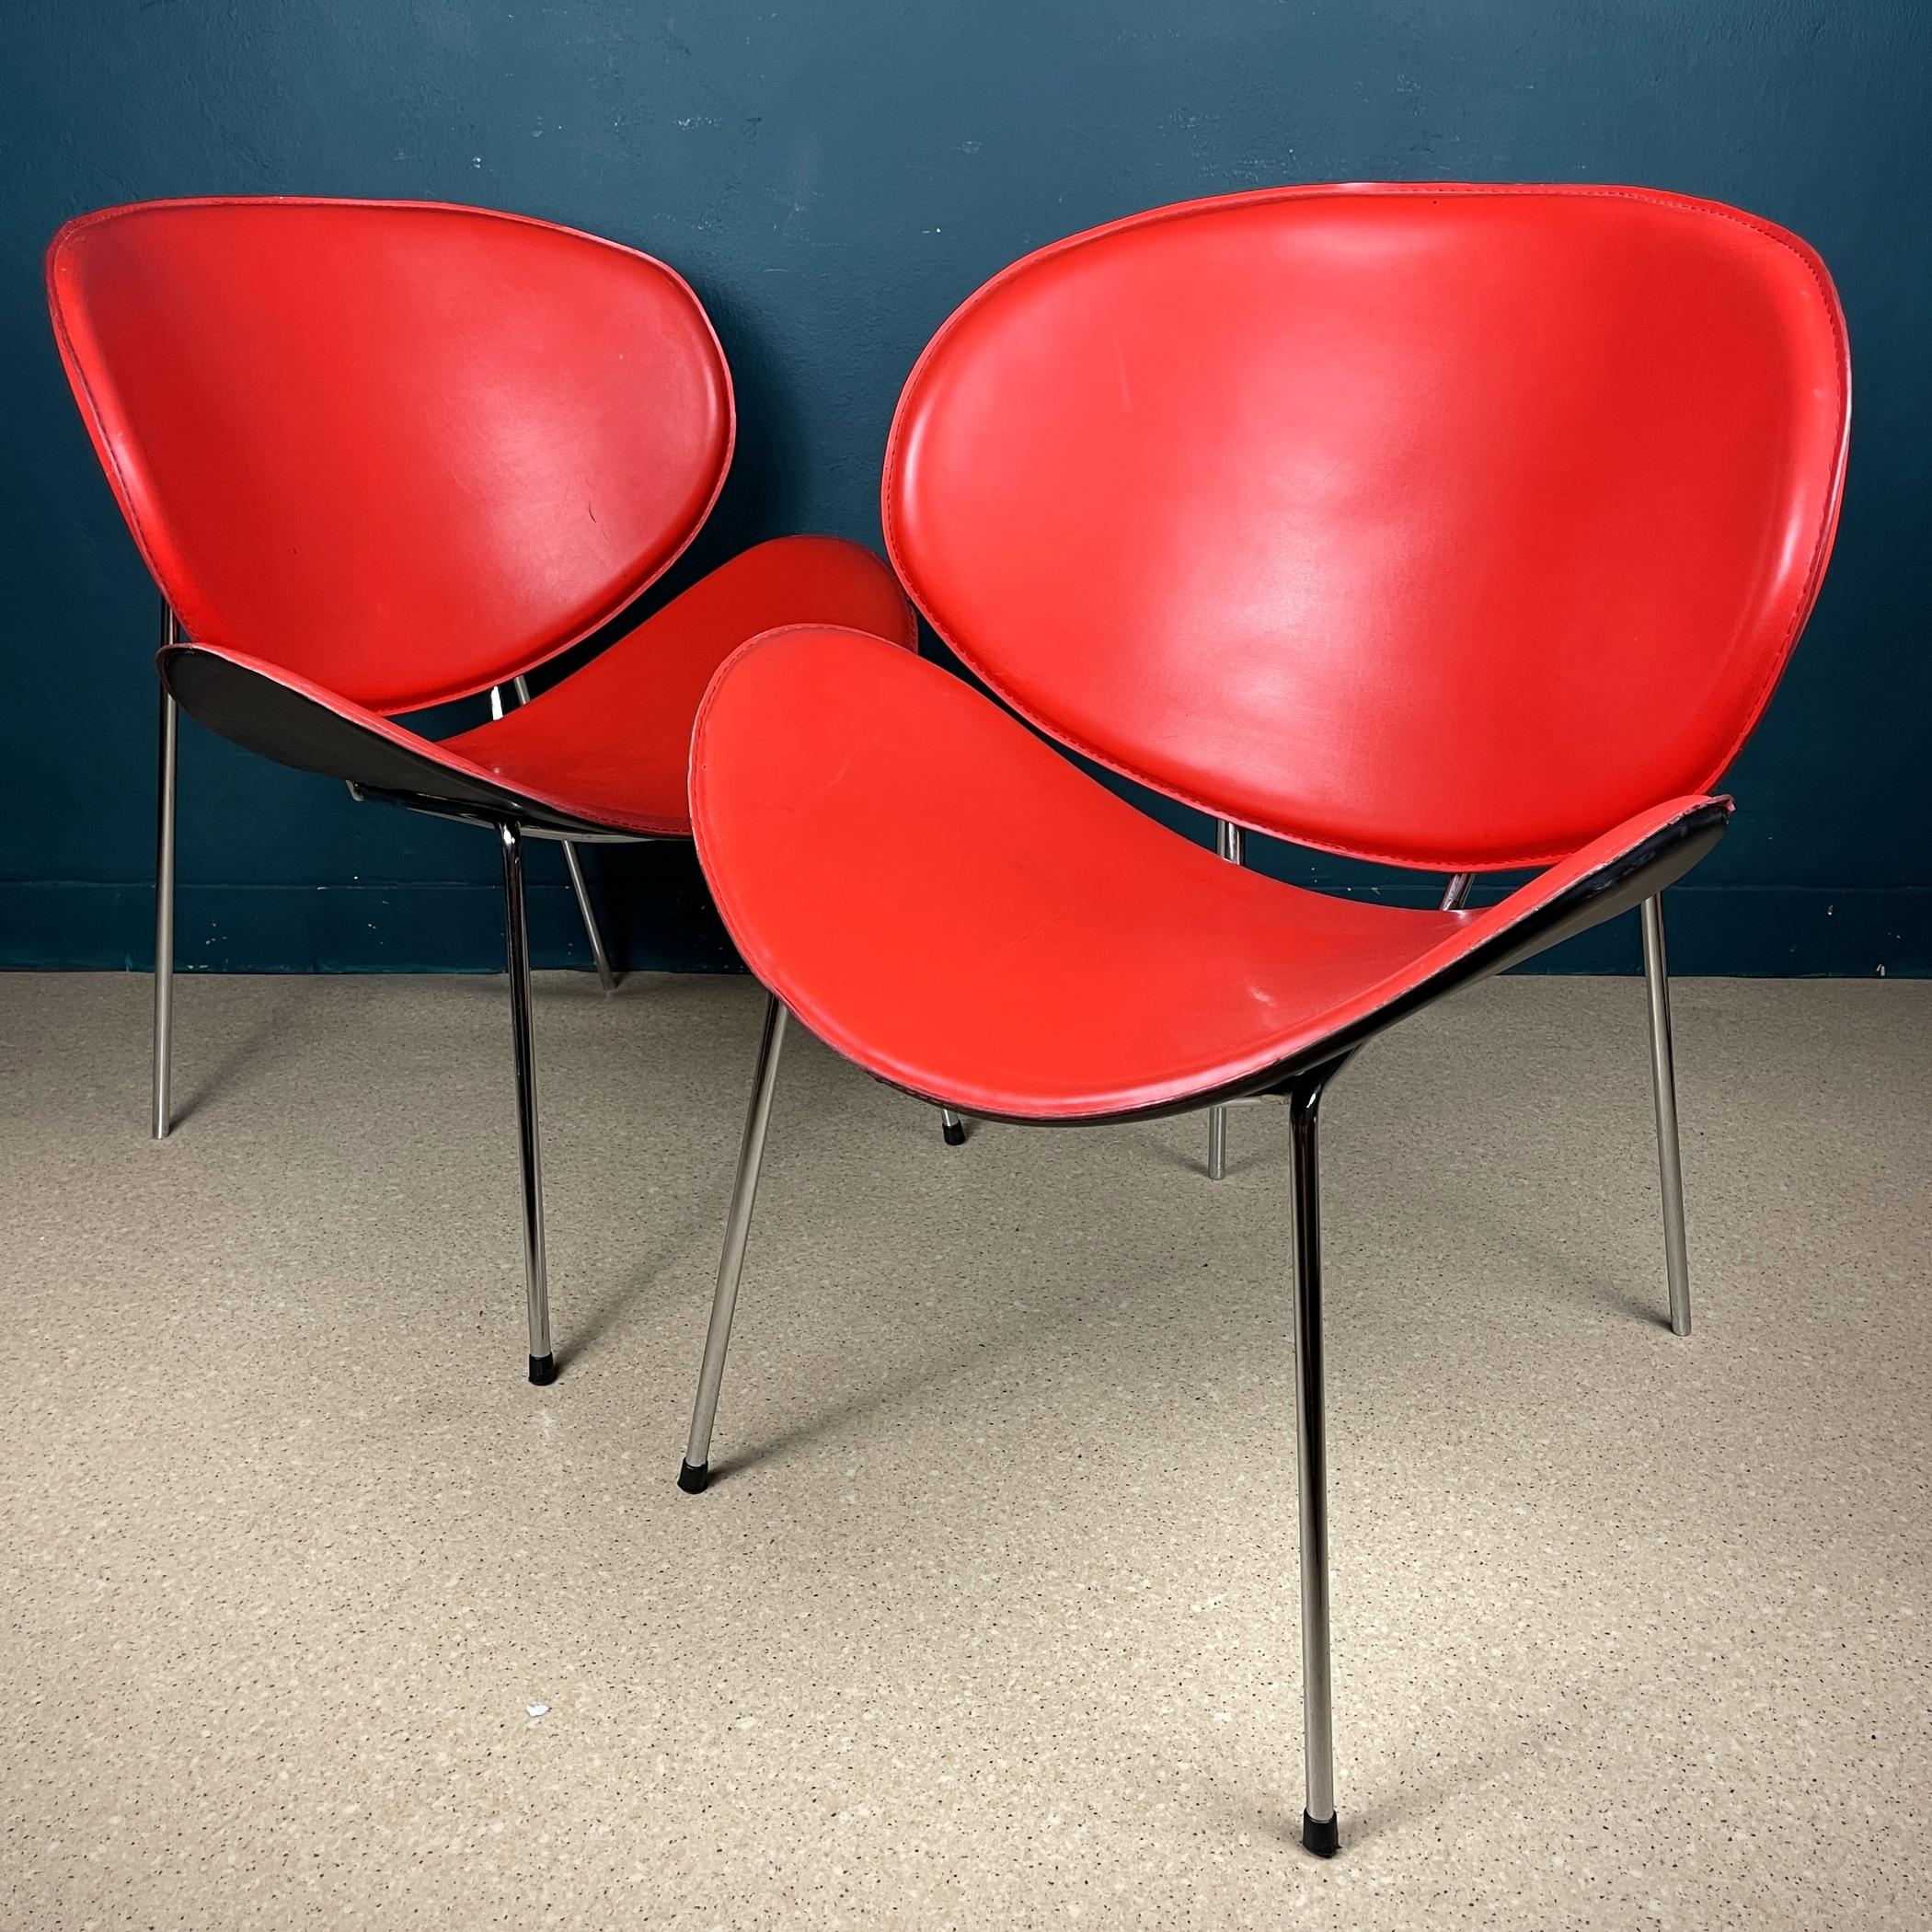 Infuse a pop of vibrant red into your living space with this captivating pair of chairs, drawing inspiration from Pierre Paulin's iconic 1960s design, the Orange Slice Chair.

Featuring a striking orange slice-shaped seat perched atop a sturdy